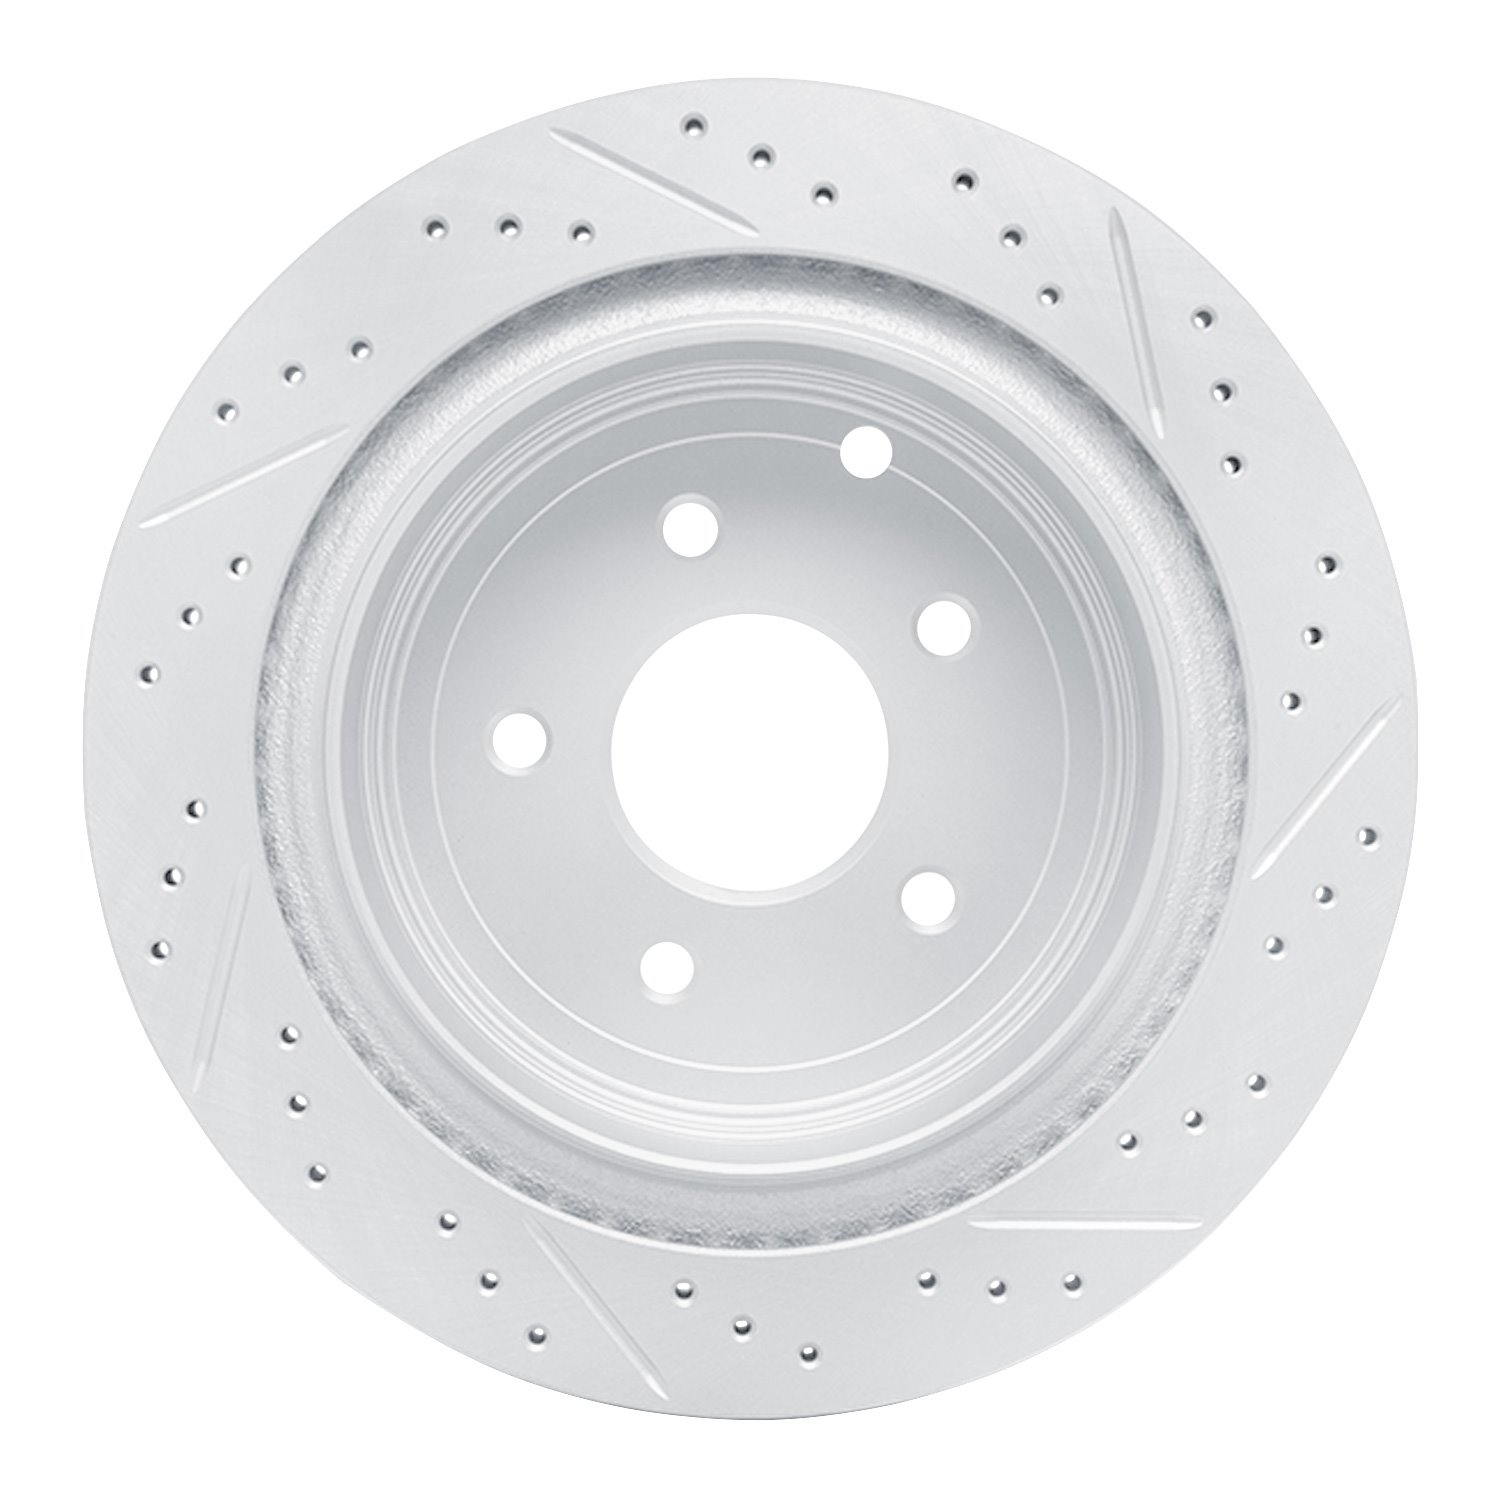 830-67089L Geoperformance Drilled/Slotted Brake Rotor, Fits Select Infiniti/Nissan, Position: Rear Left